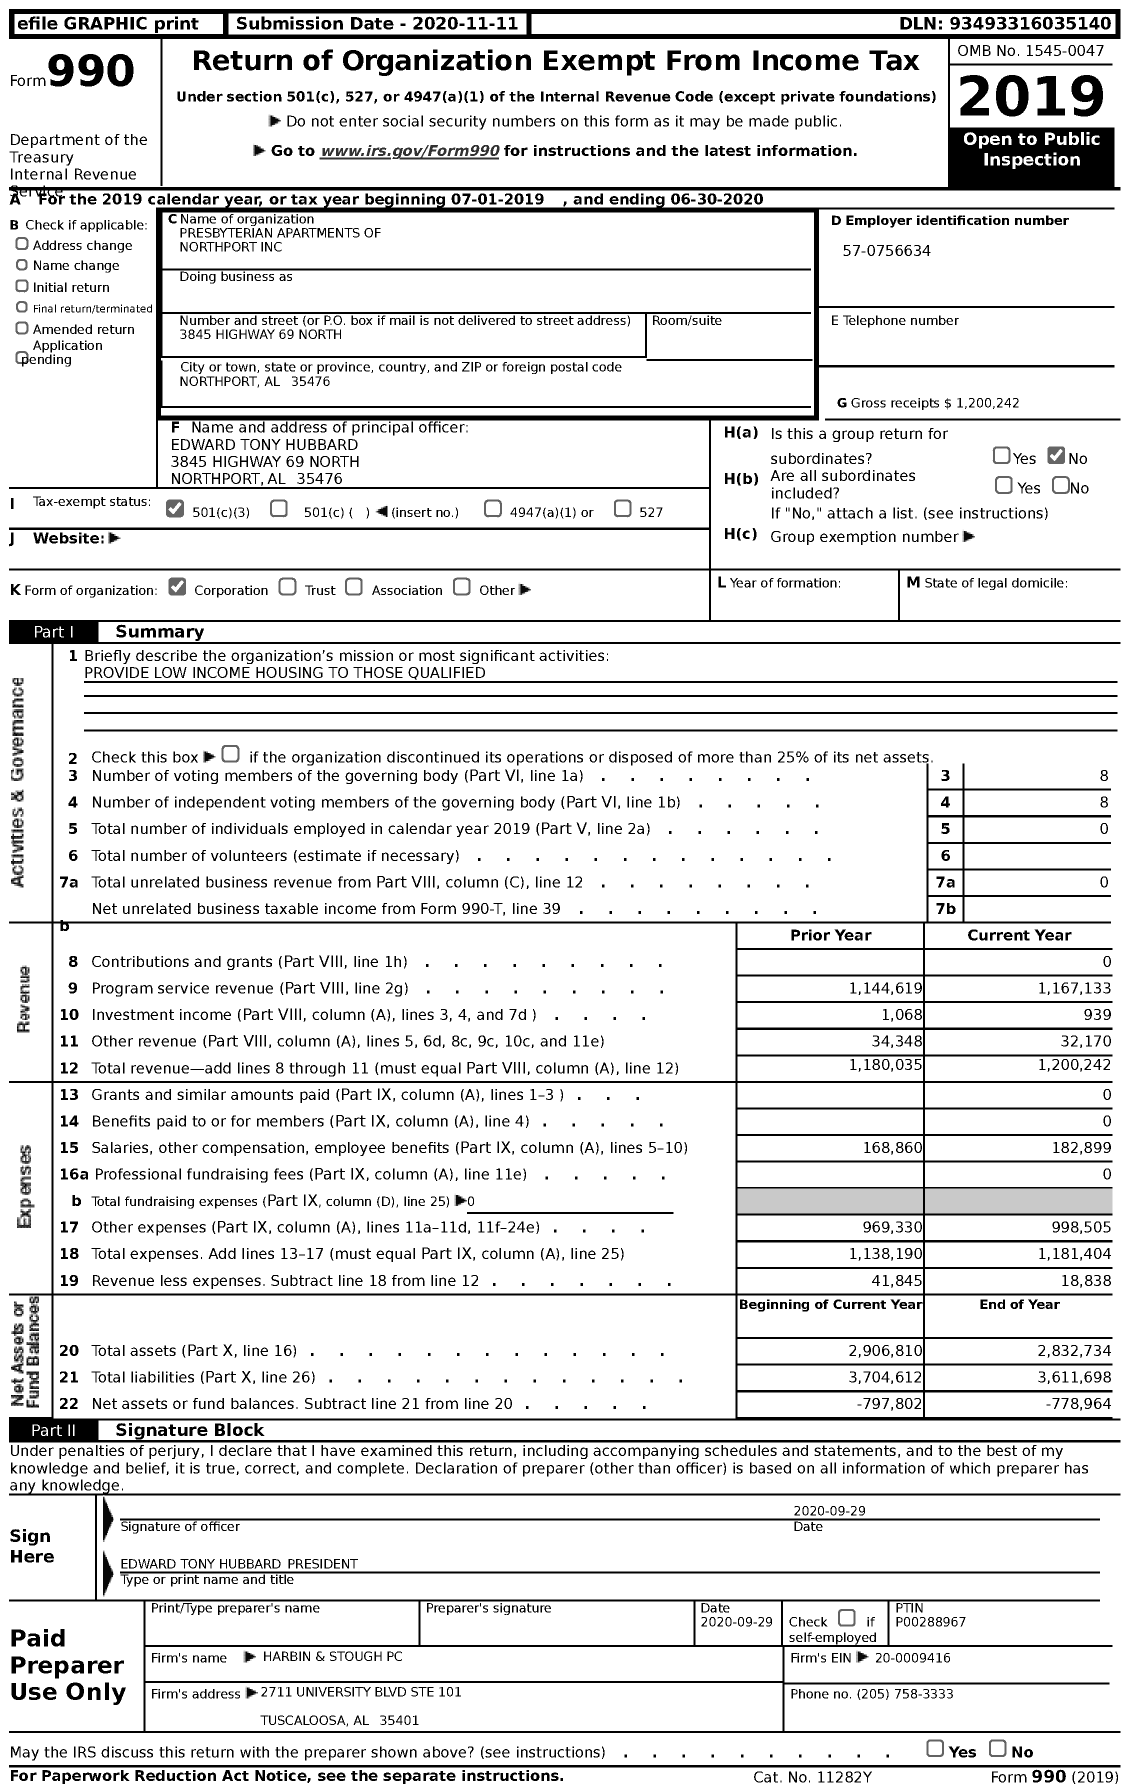 Image of first page of 2019 Form 990 for Presbyterian Apartments of Northport